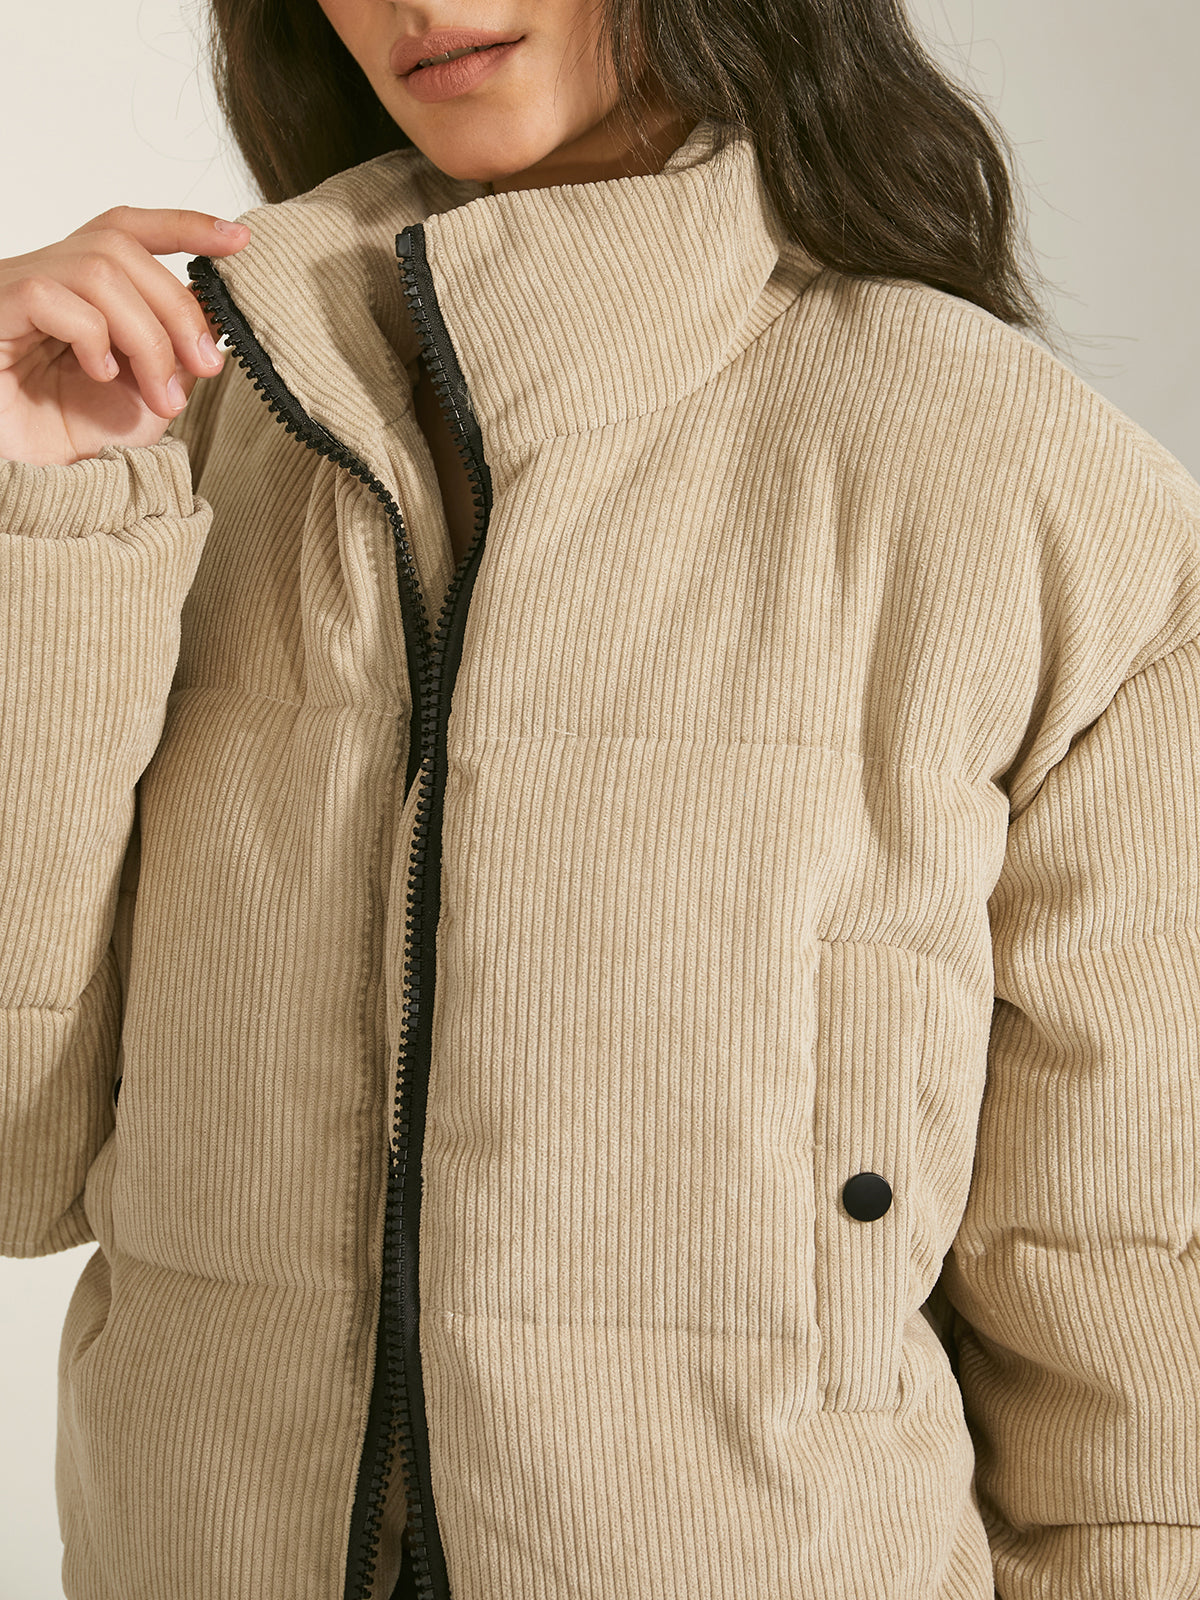 Cropped Funnel Neck Puffer Jacket